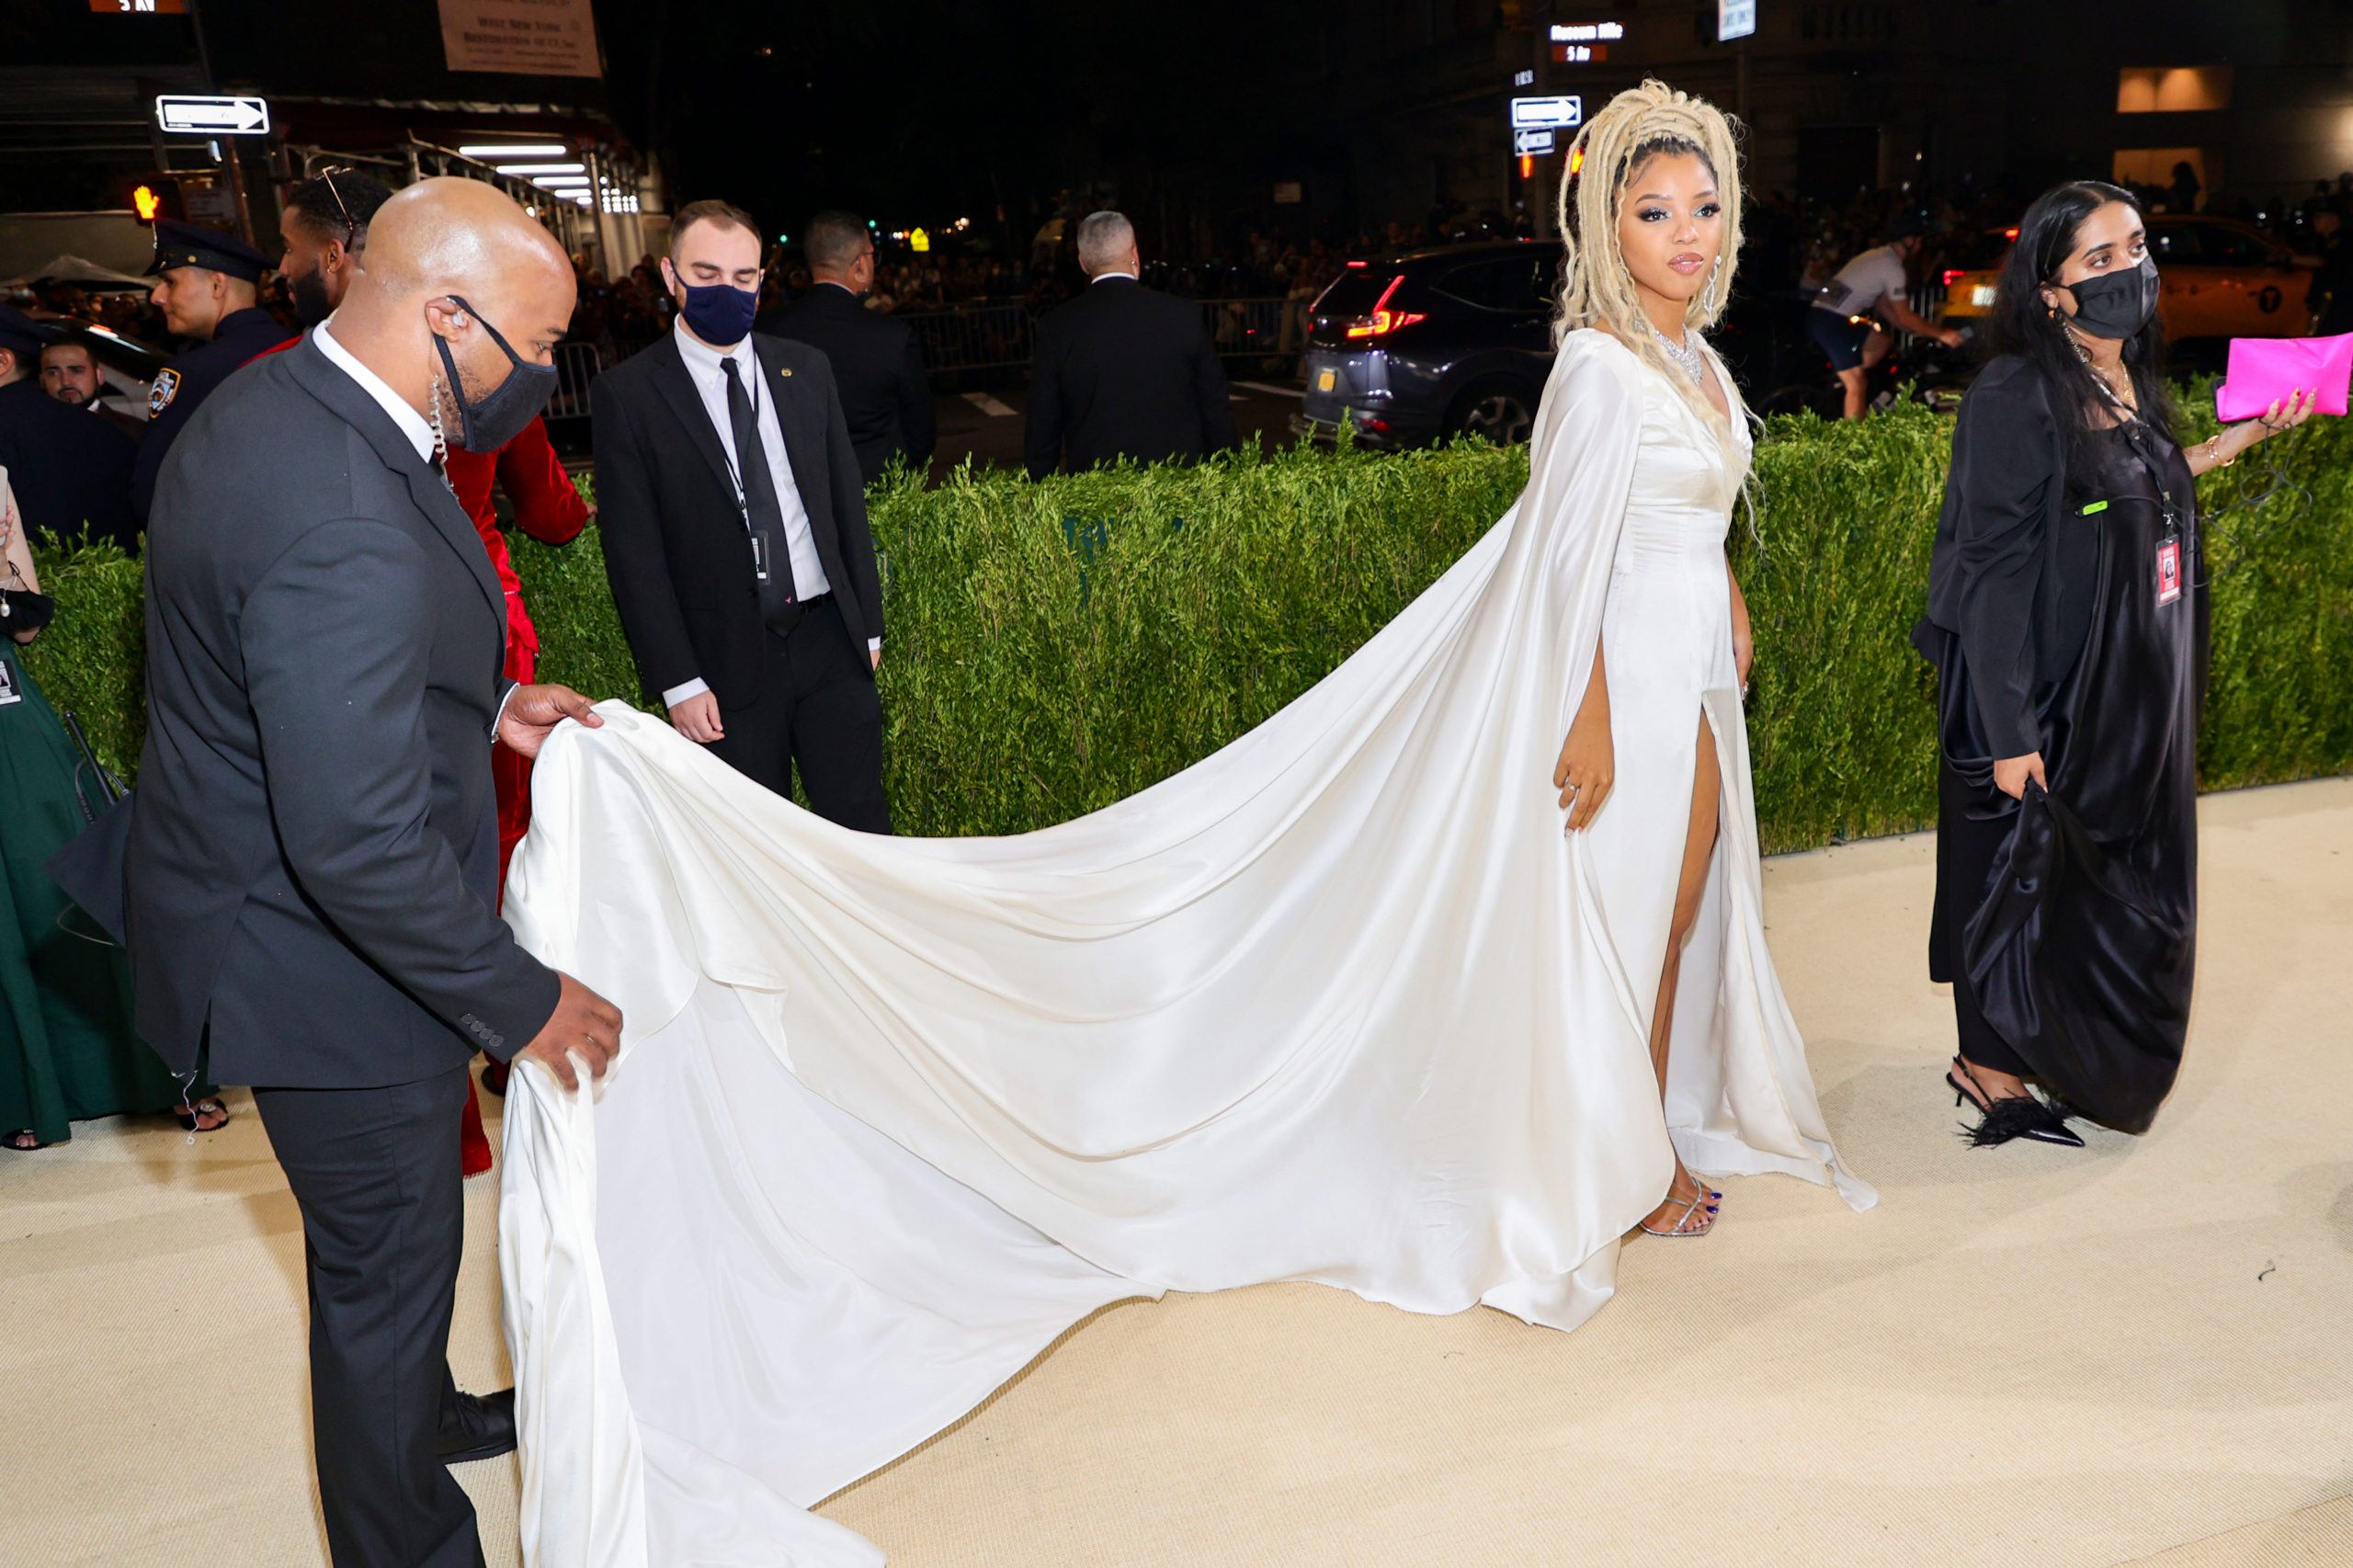 Chloe Bailey attends The 2021 Met Gala Celebrating In America: A Lexicon Of Fashion at Metropolitan Museum of Art on September 13, 2021 in New York City. (Photo by Theo Wargo/Getty Images)